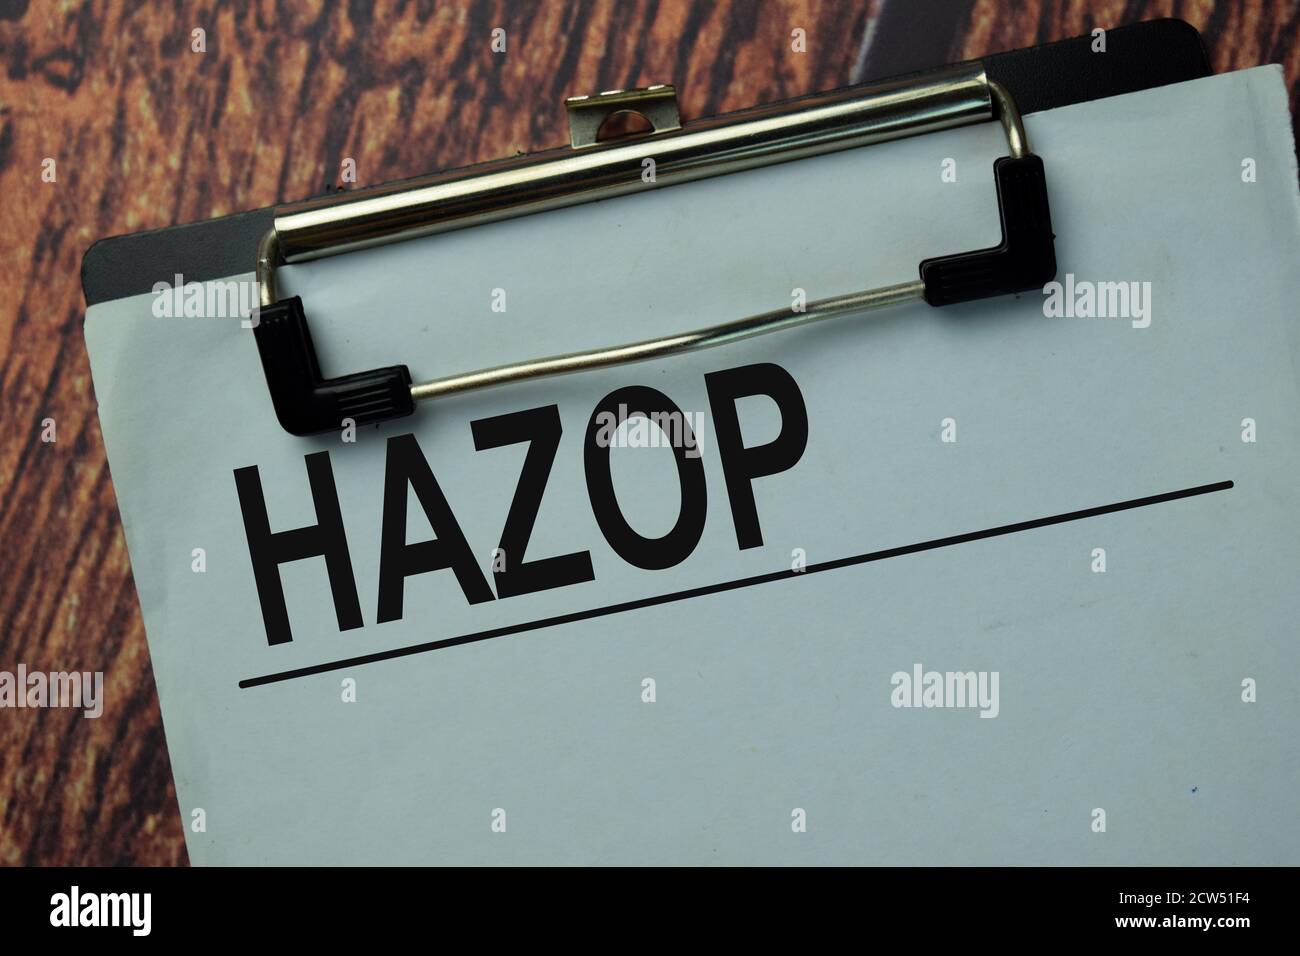 Hazop write on a paperwork isolated on office desk. Stock Photo